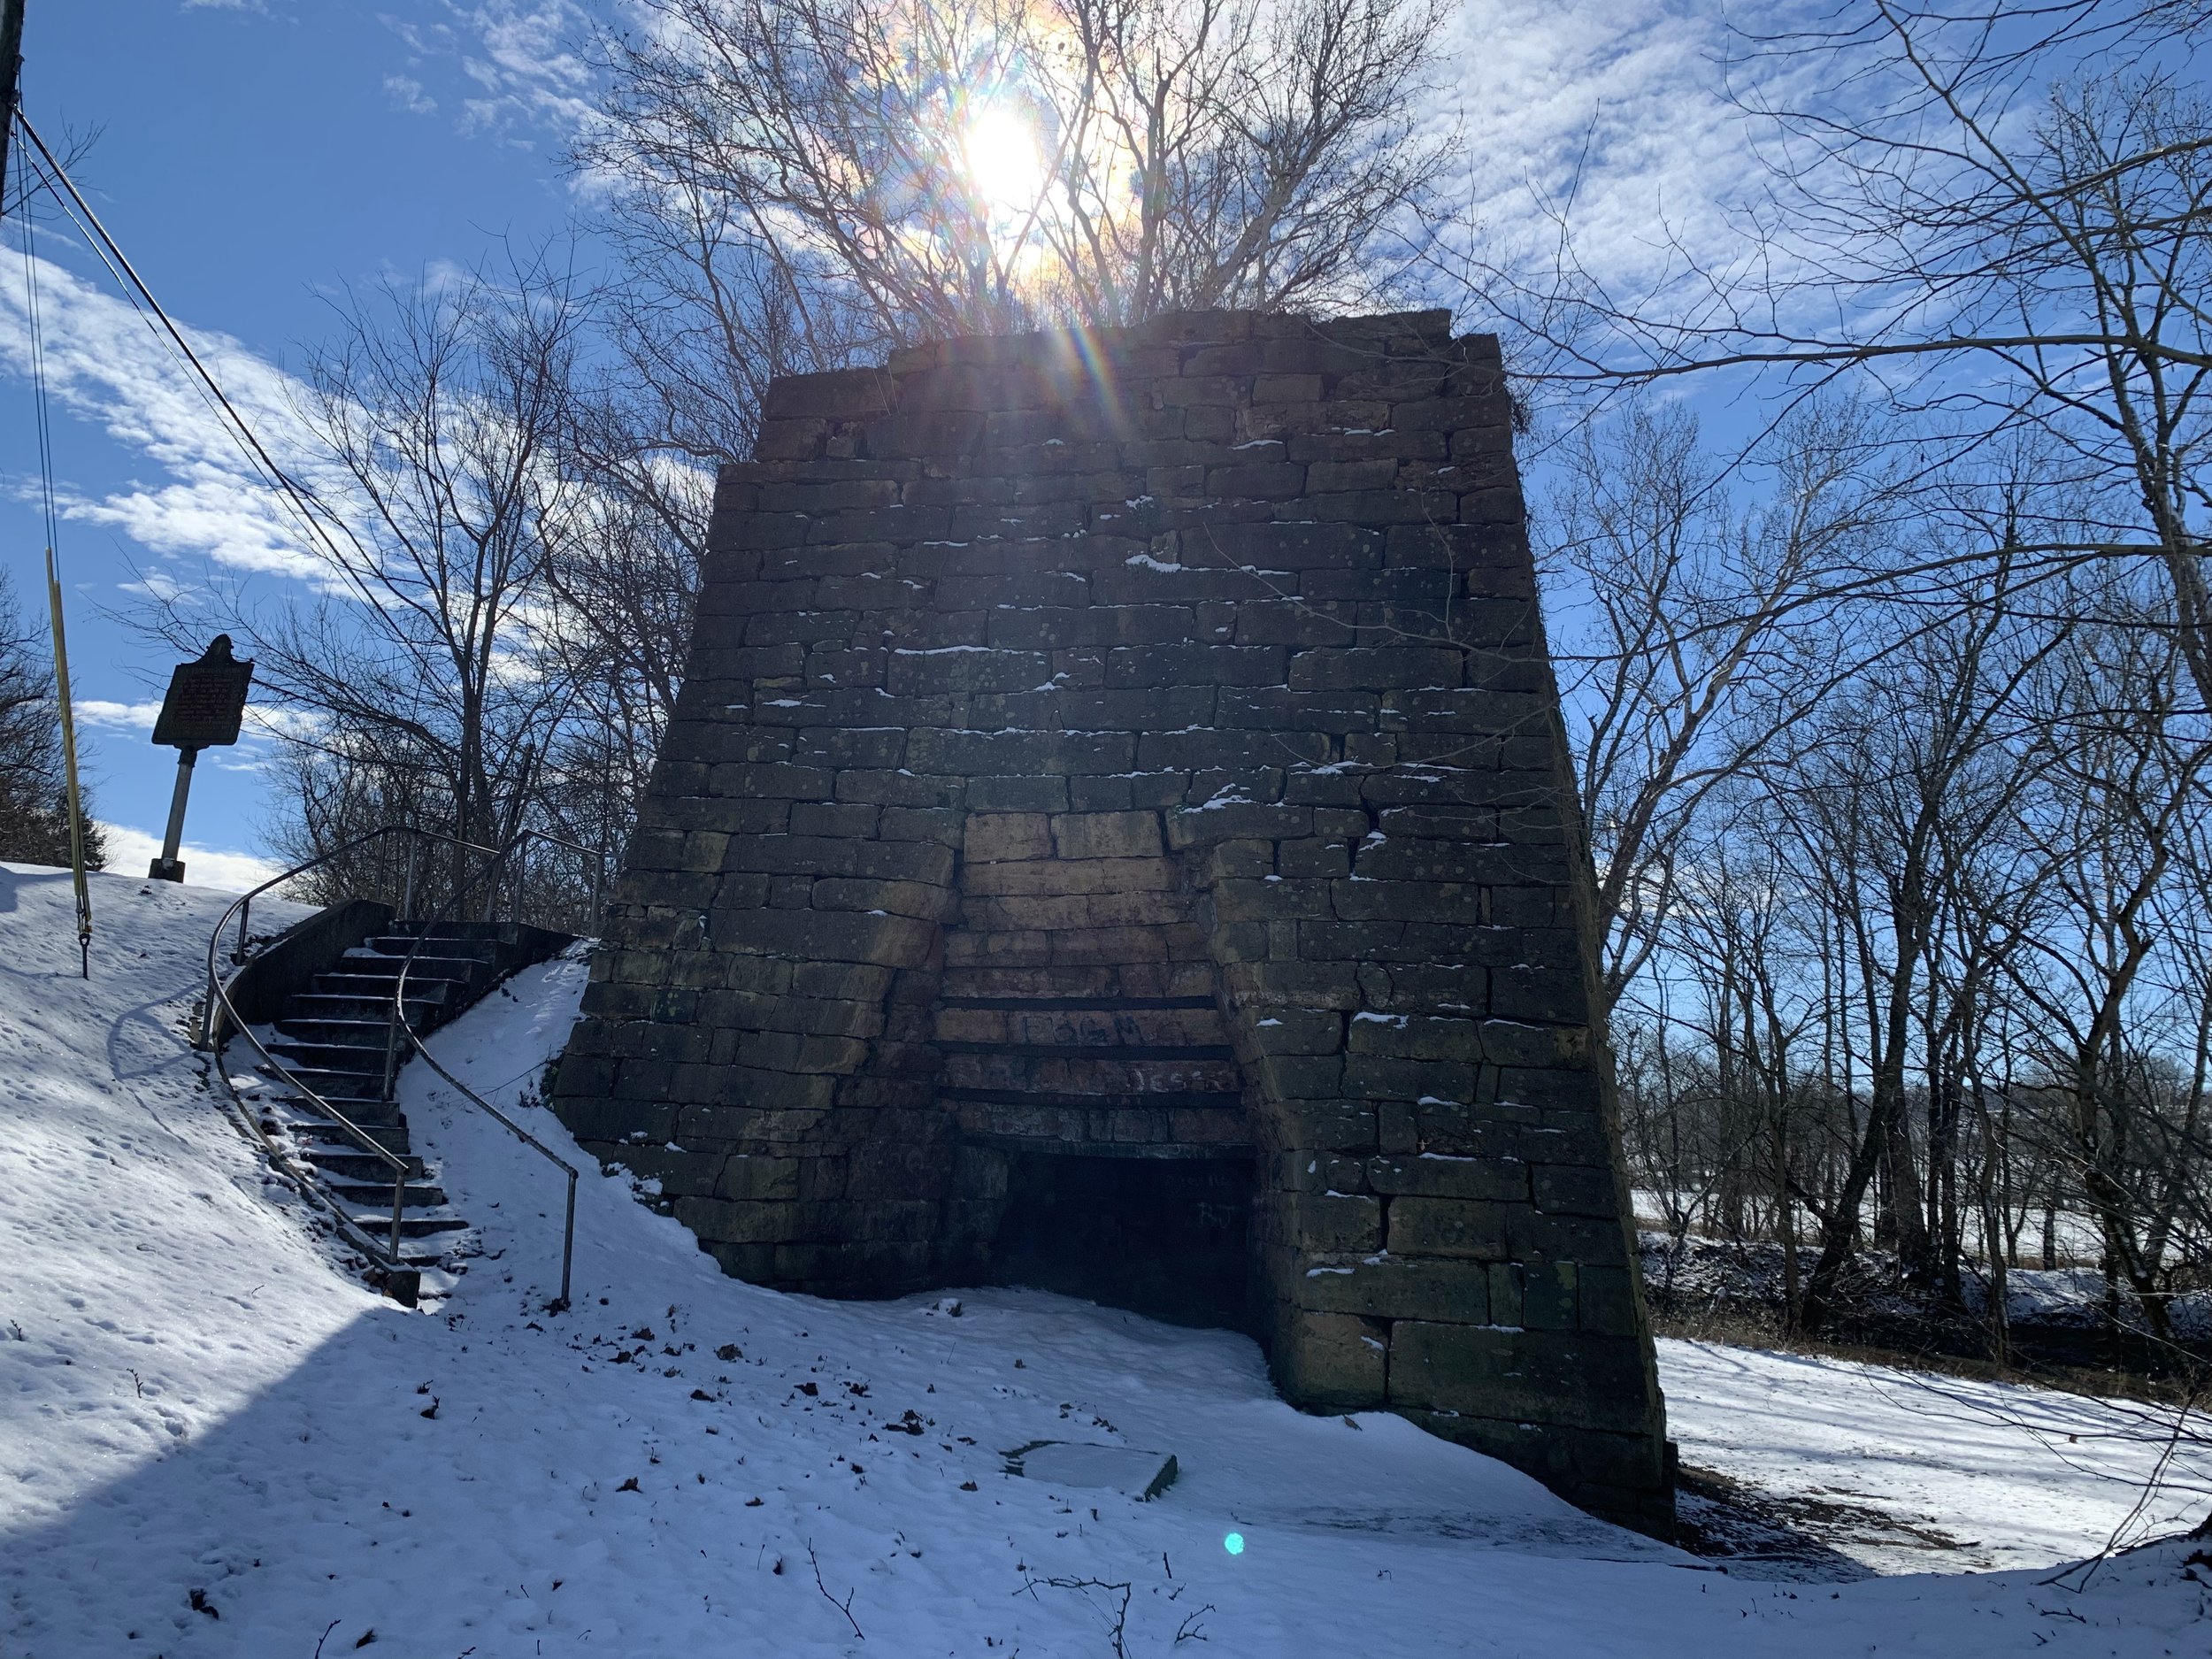 One Entrance to the Furnace with the Sun, Showing the Staircase to the Upper Region and State Historical Marker